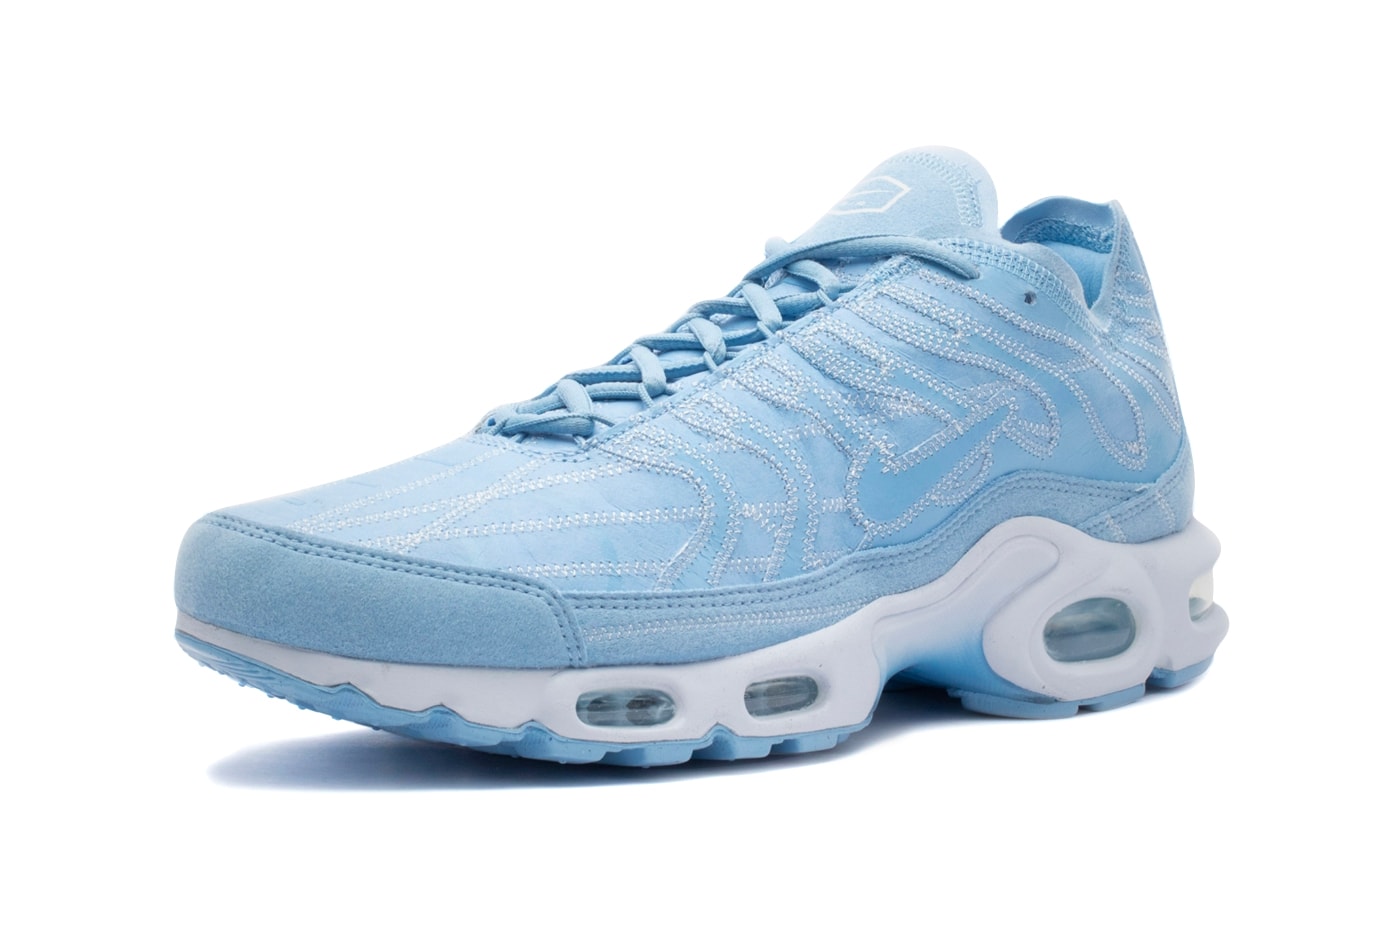 nike-air-max-plus-deconstructed-psychic-blue-release-3